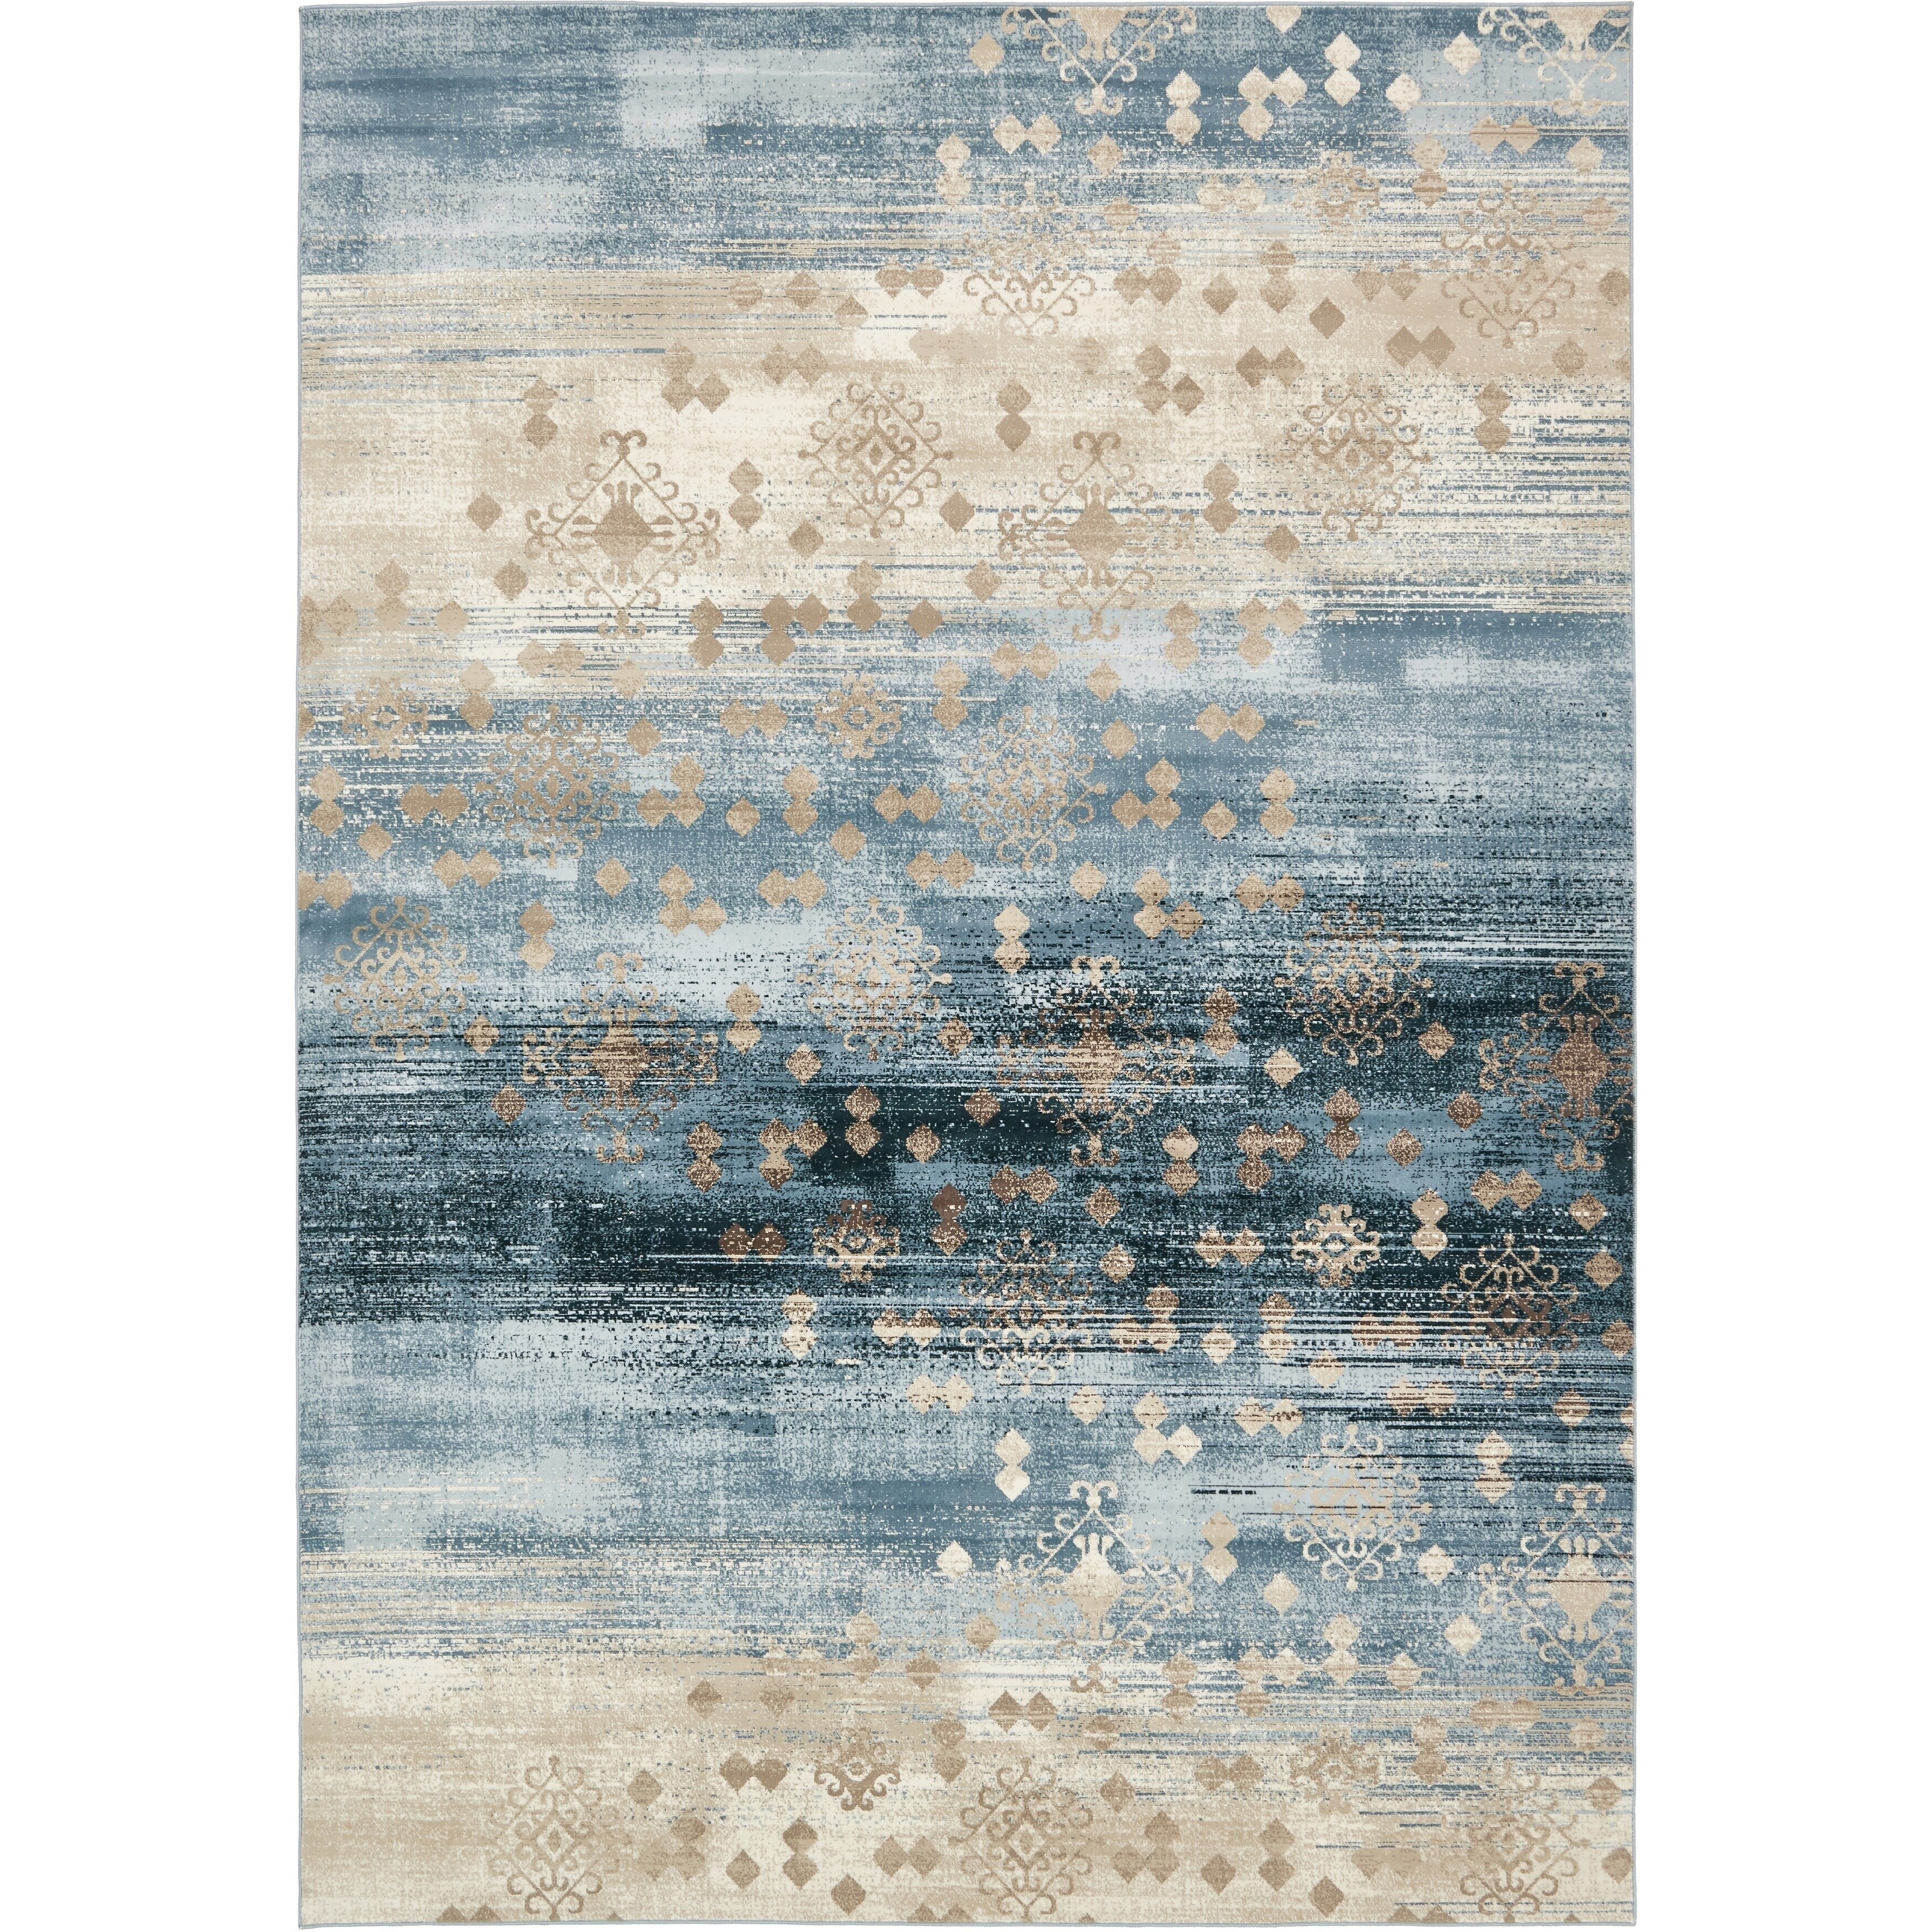 Buy Blue 8 X 10 Area Rugs Online At Overstockcom Our Best Rugs